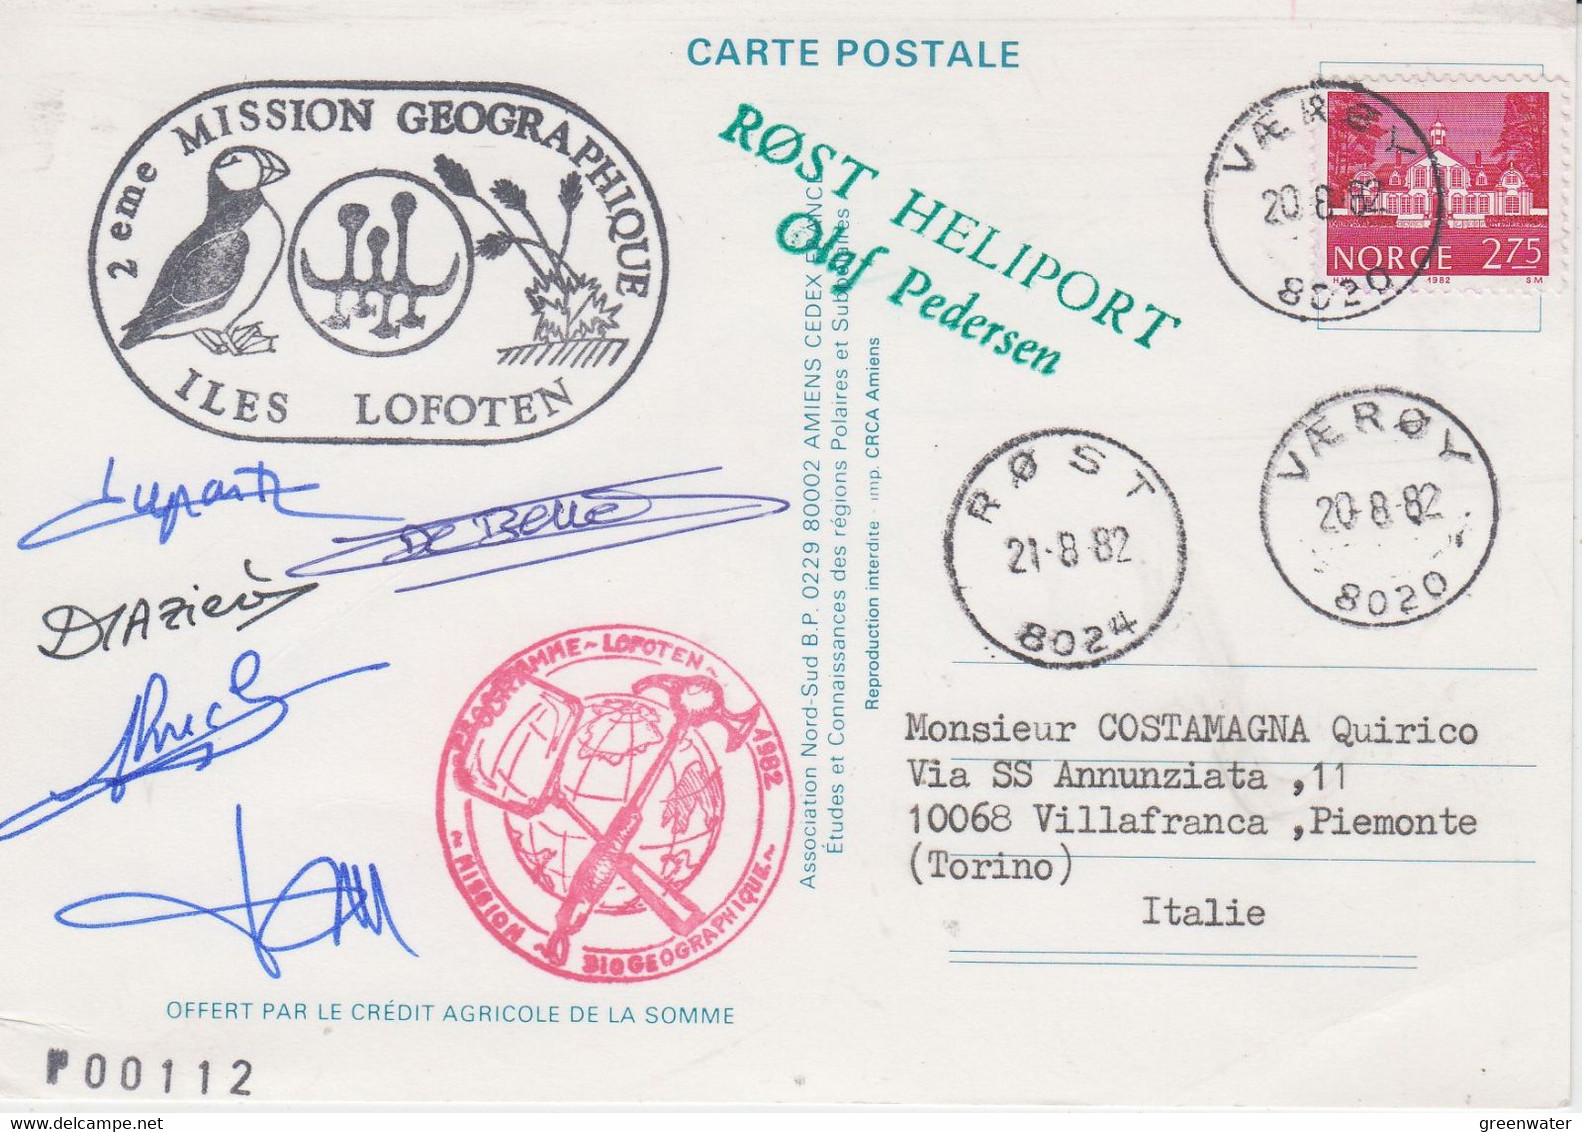 Norway 1982 Postcard Emile Victor  2eme Mission Georgraphique Ca Rost Heliport  5 Signatuires Ca Varoy 20-8-1982 (NW200) - Research Programs